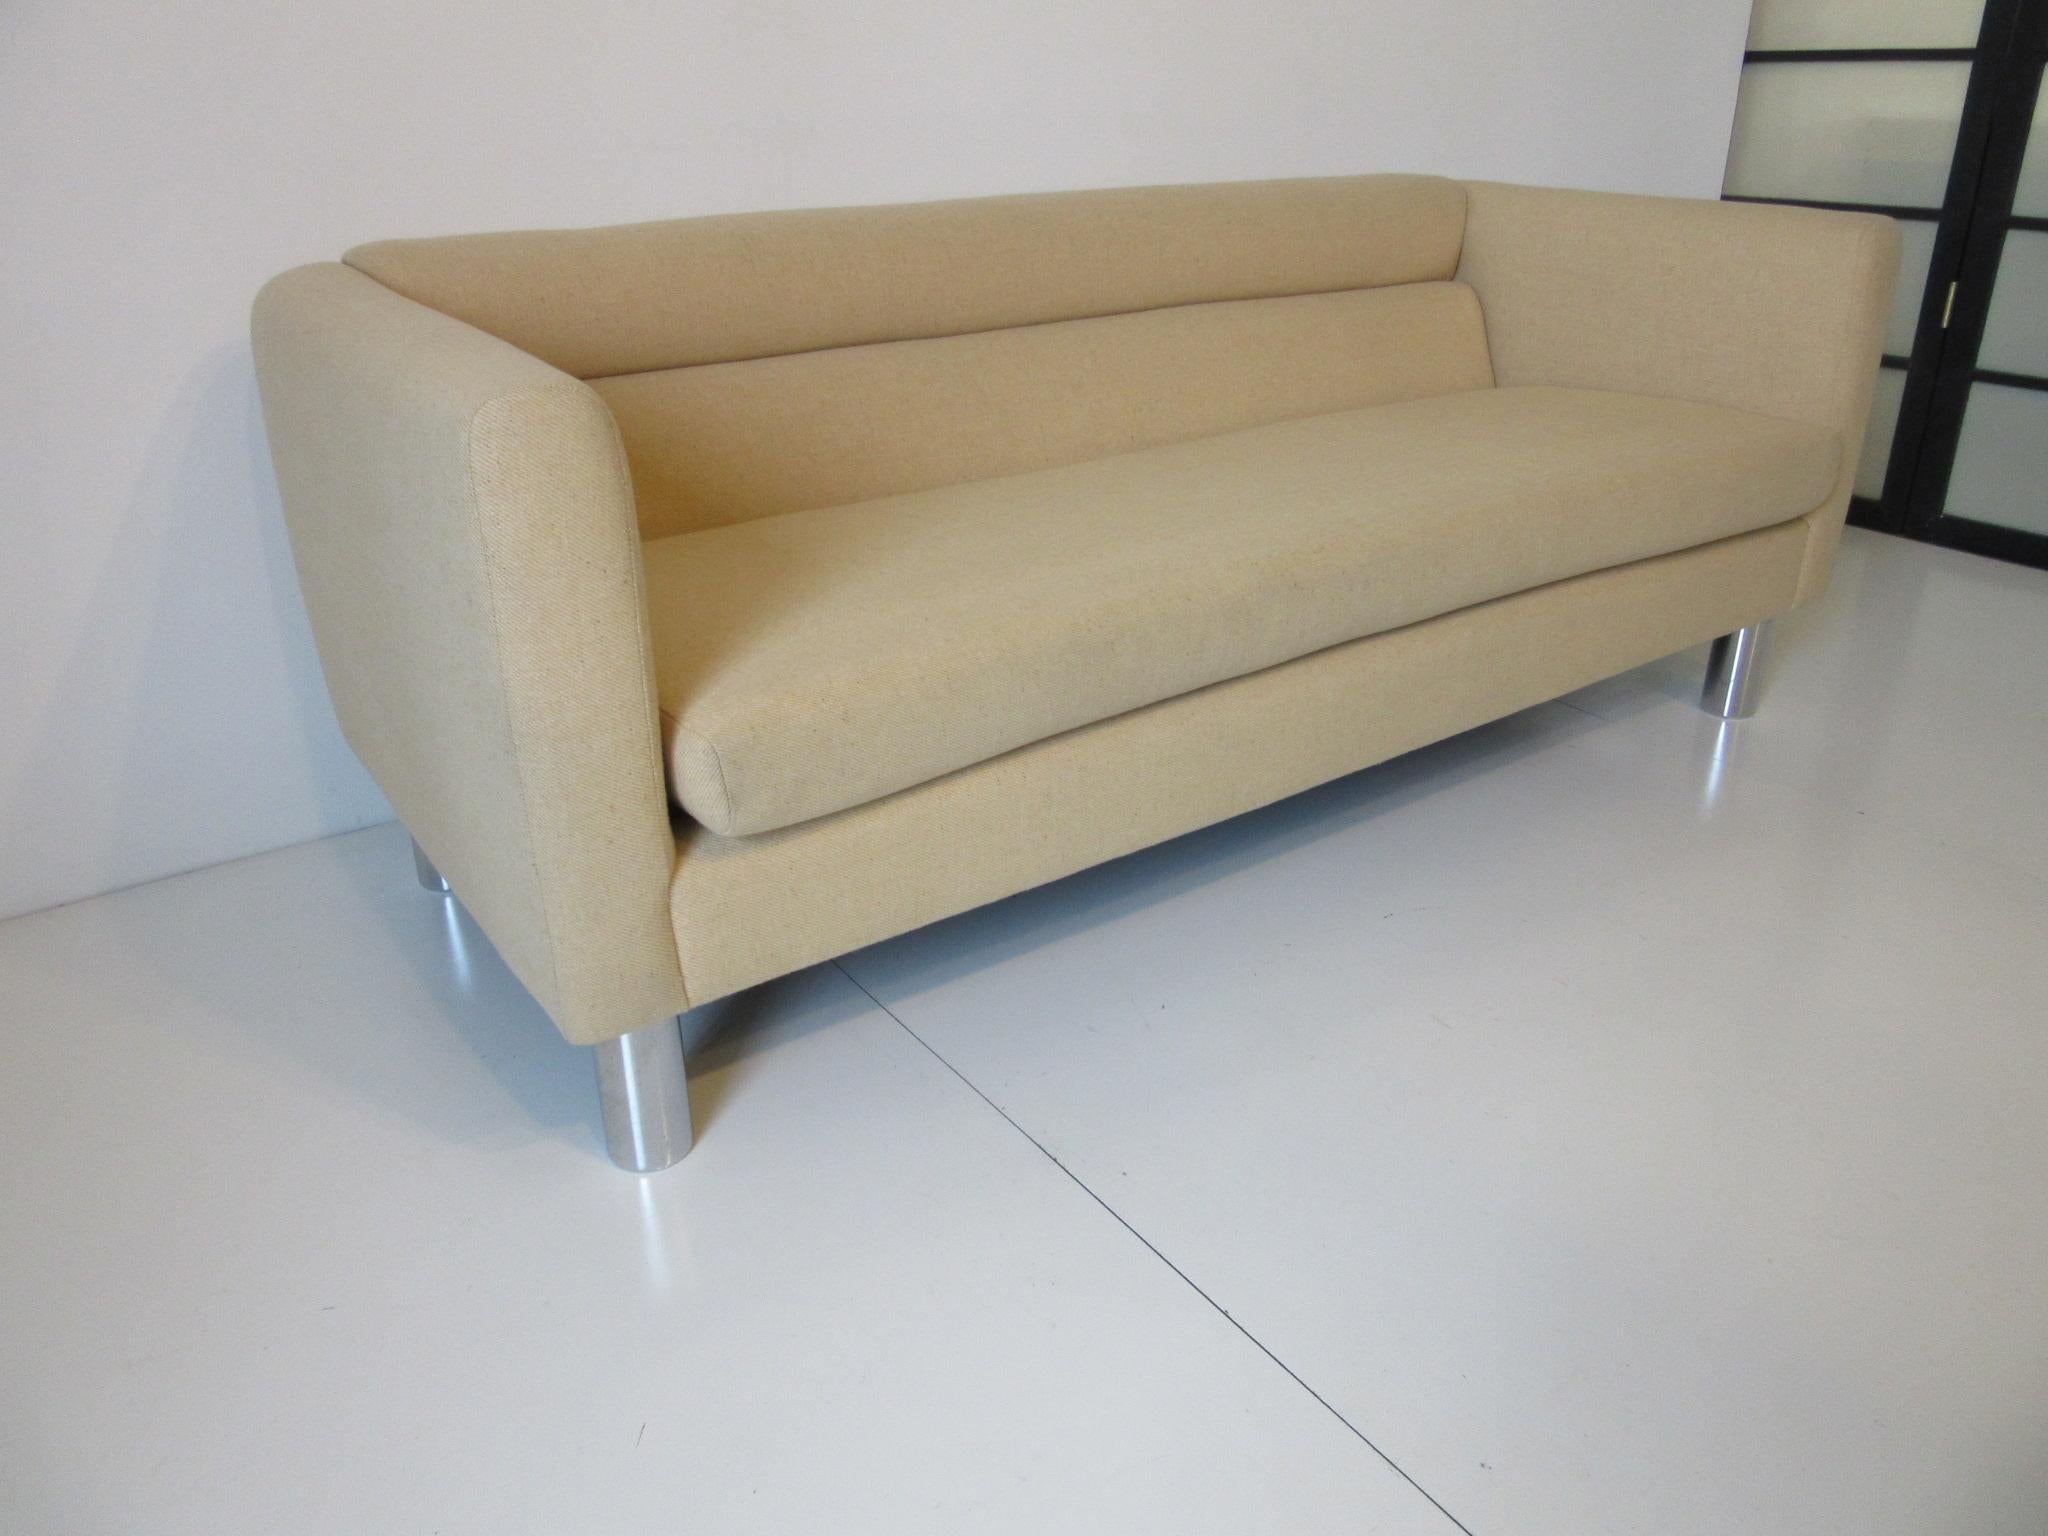 A vintage 1970s sofa or loveseat with fitted back and loose bottom cushion with chromed round tube shaped metal legs and original wool blended fabric, retains the manufactures label and ticking by David Edward Furniture Ltd. A very modern